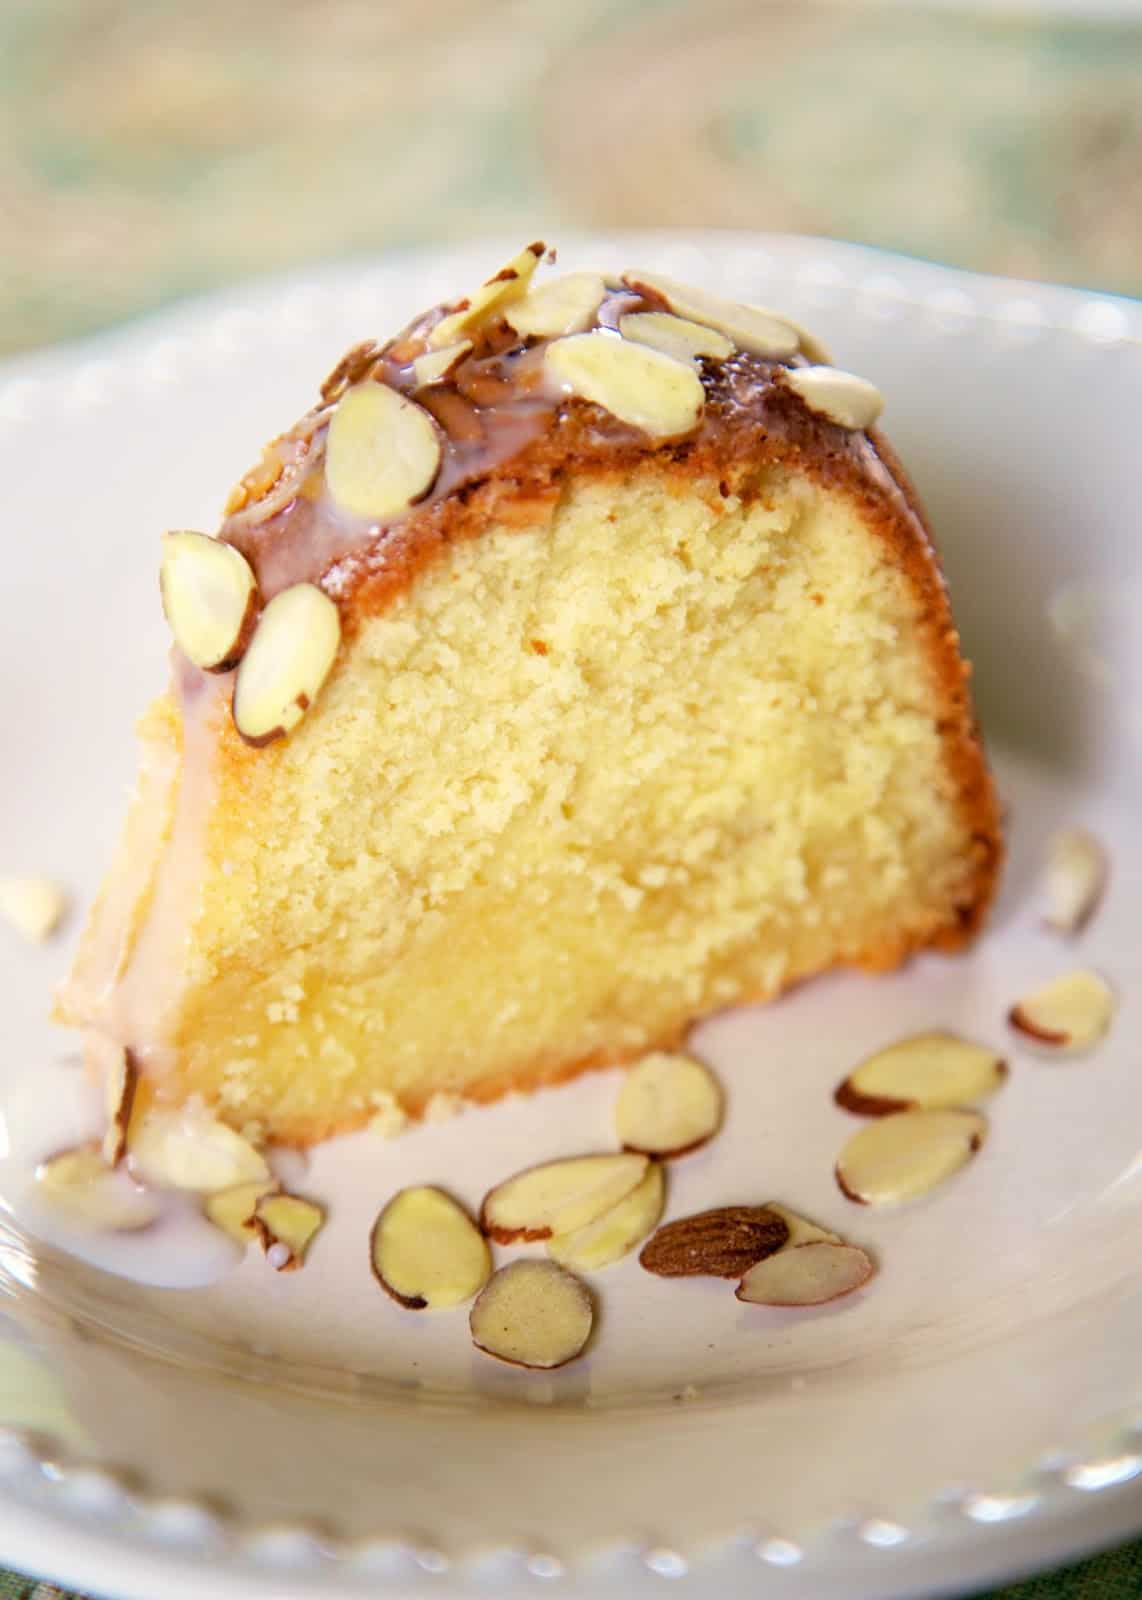 Amaretto Pound Cake - dangerously delicious!!! LOADED with tons of great almond flavor. Moist homemade cake topped with a homemade almond syrup and almond glaze. I ate WAY too much of this yummy cake!! Butter, cream cheese, sugar, amaretto, almond extract, flour, eggs, sliced almonds, powdered sugar and milk. #poundcake #dessert #dessertrecipe